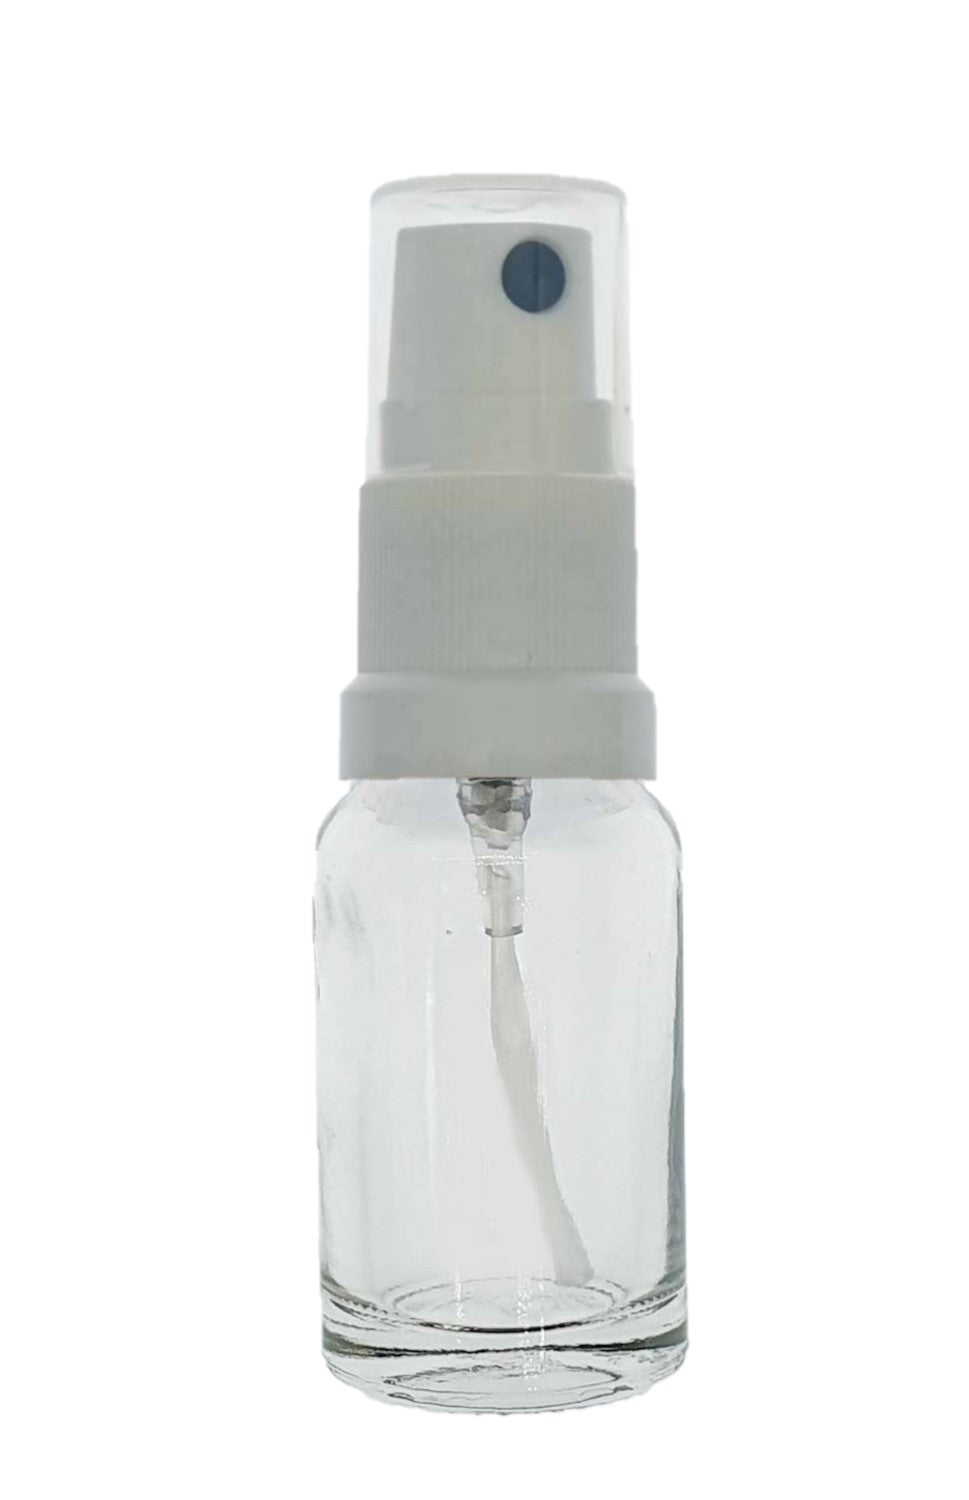 10ml Clear Glass Bottles with White Atomiser Spray and Clear Overcap